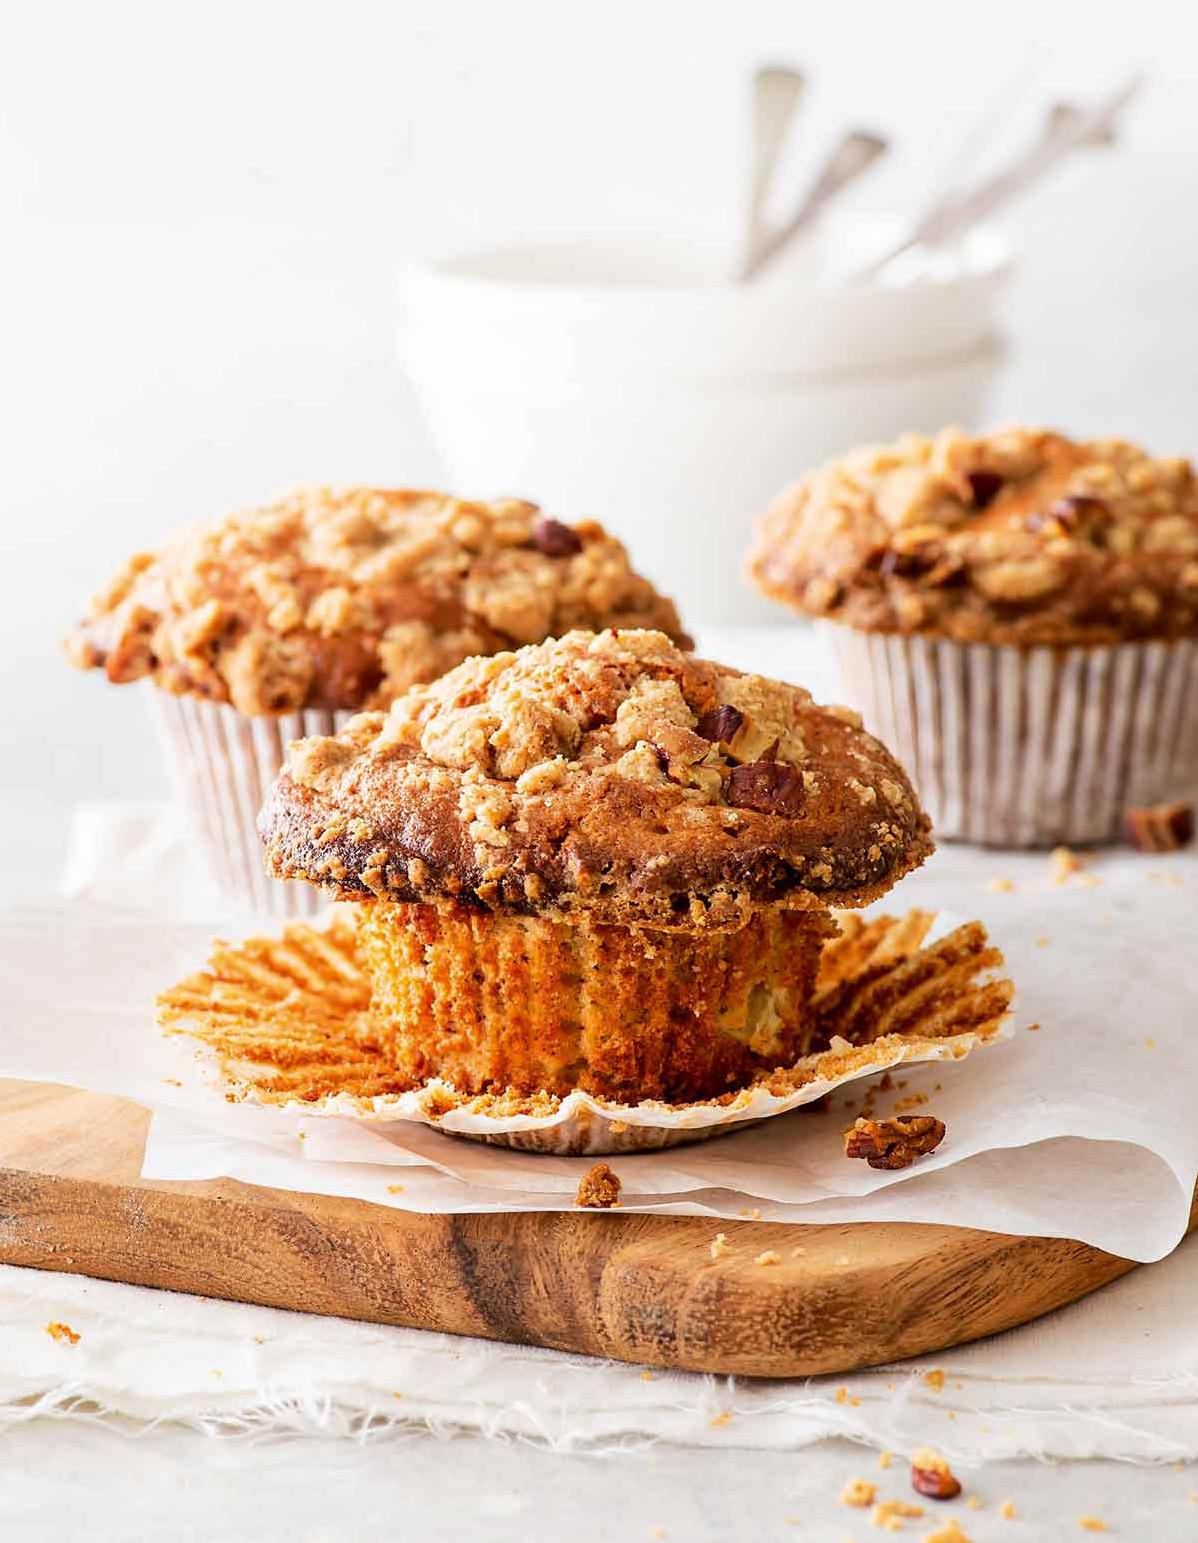  These muffins are what fall dreams are made of.